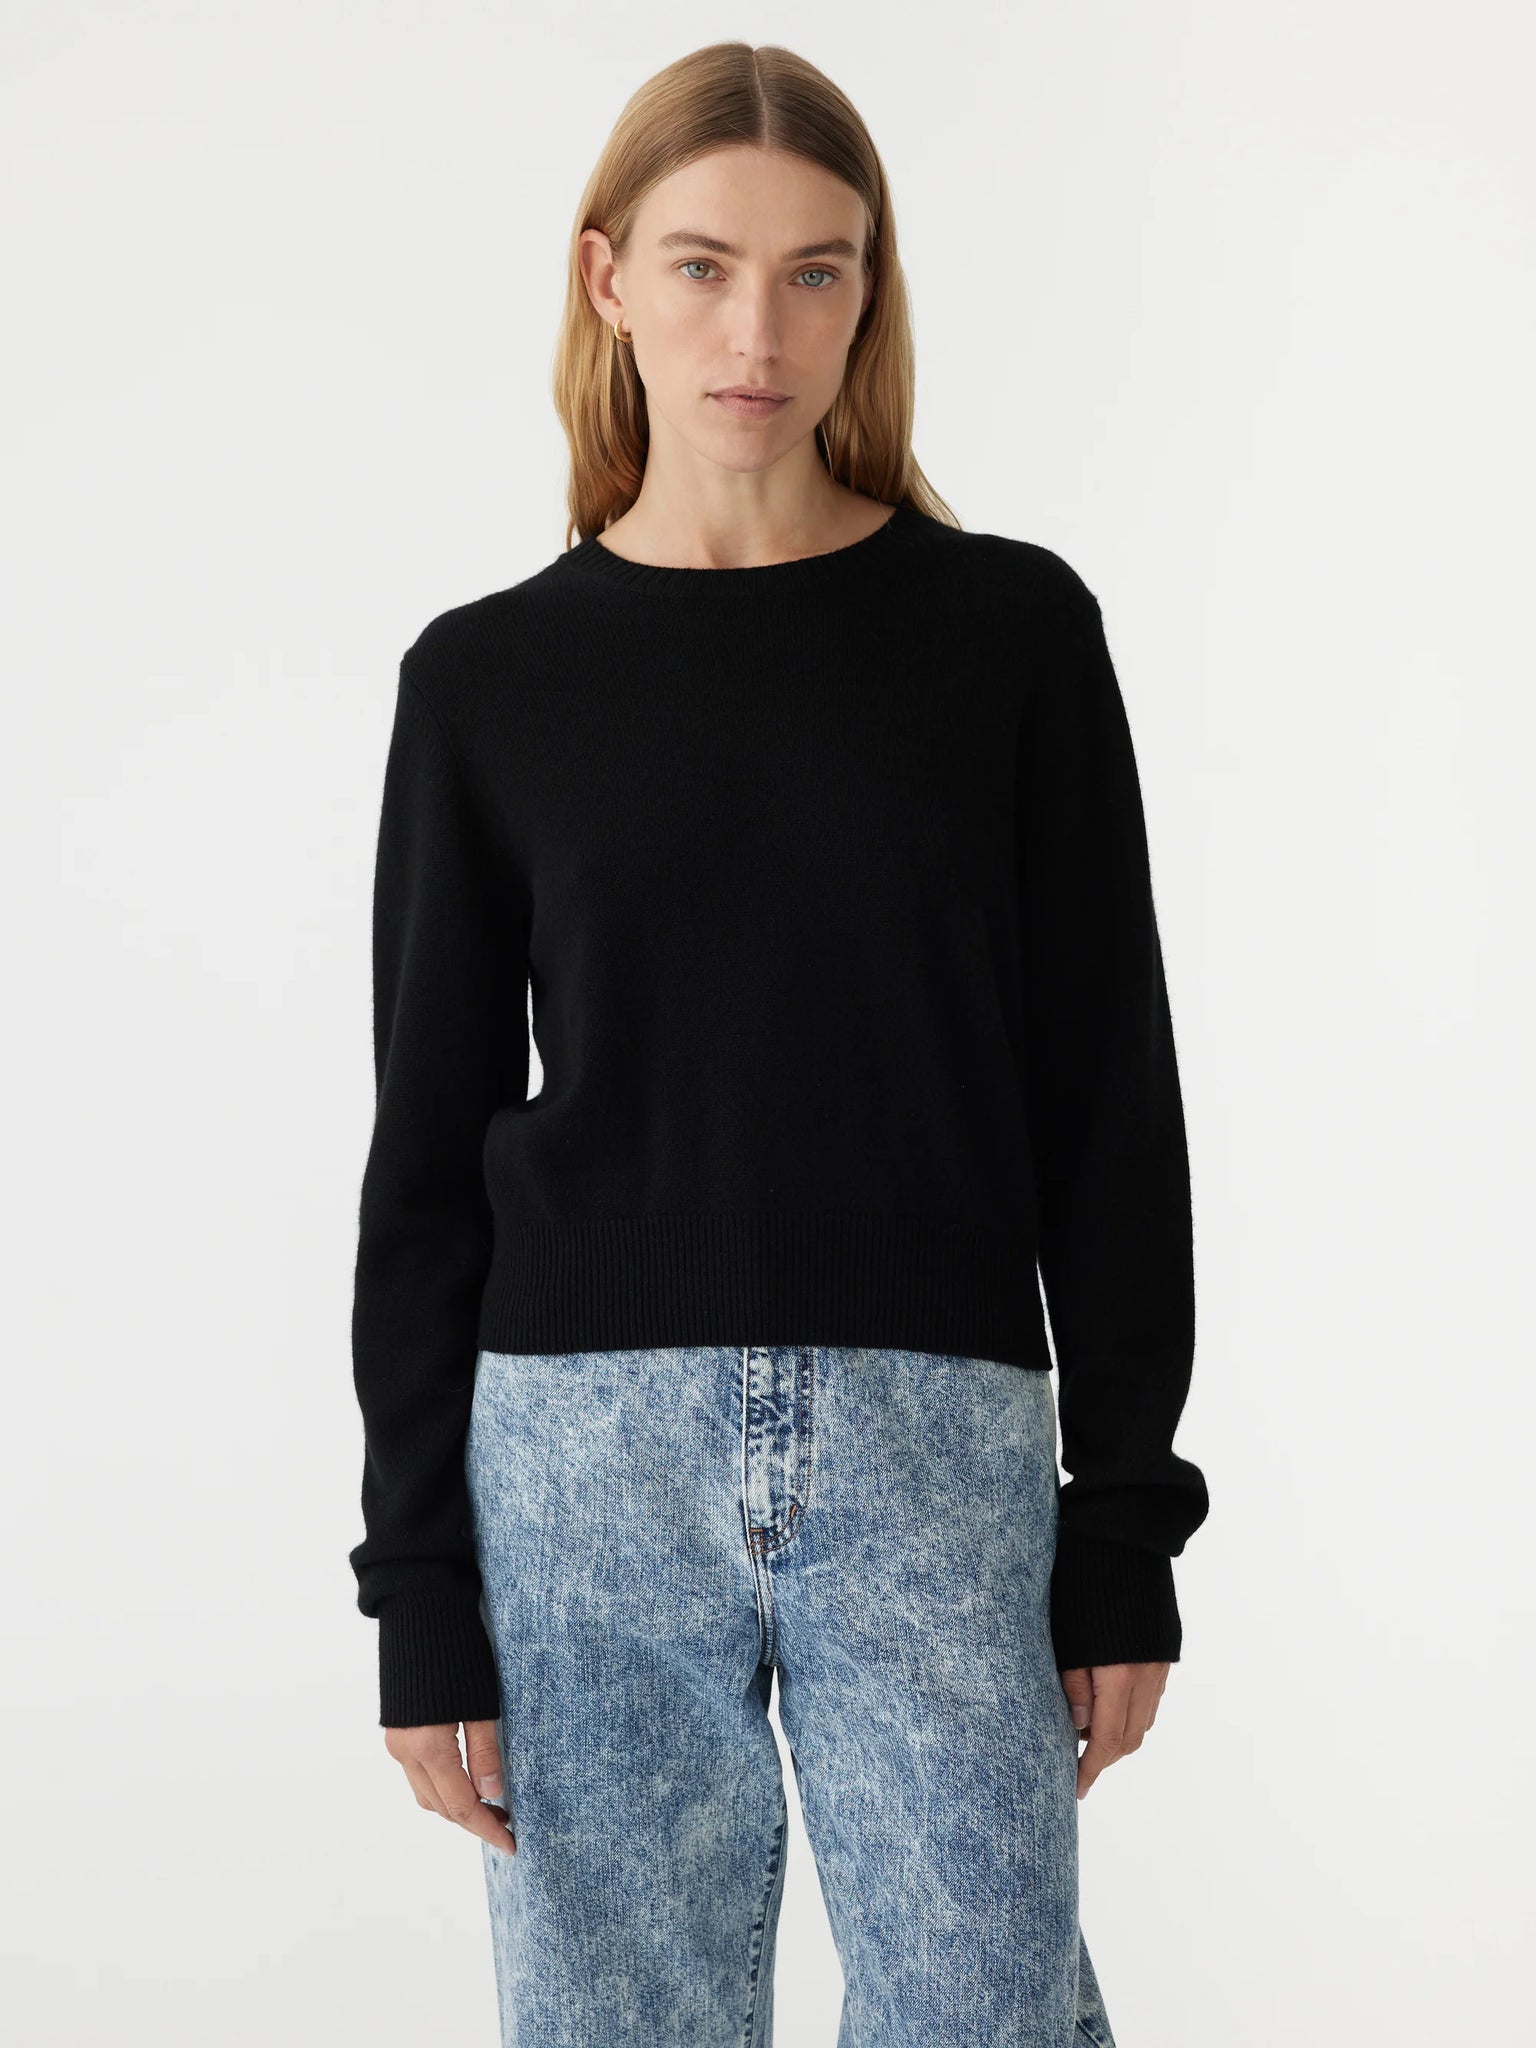 wool cashmere classic knit